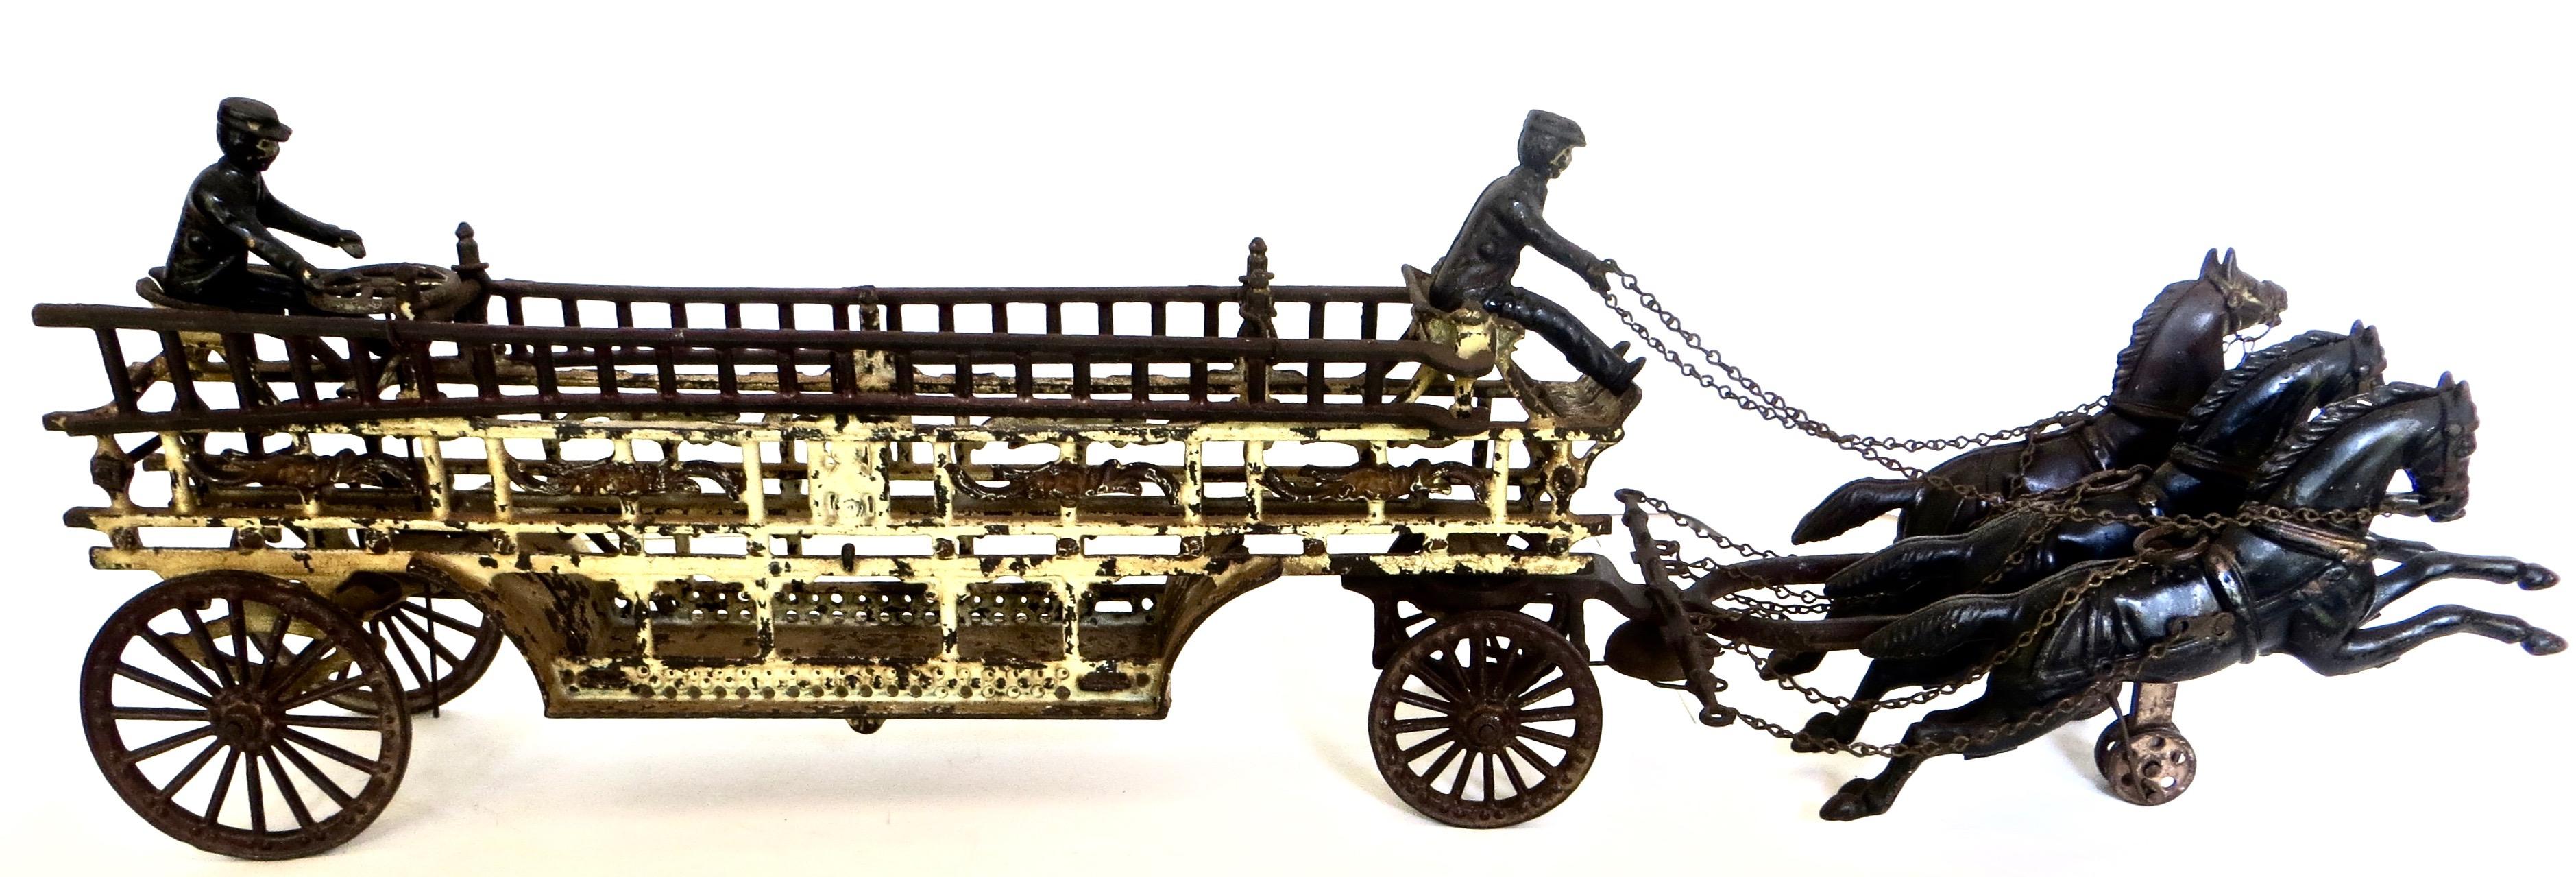 Large cast iron, horse drawn fire toys (referred to as oversized) are much sought after by collectors. The piece becomes more in demand when it is all original, because of the abuse that would have occurred from rough play. Over the years the cast